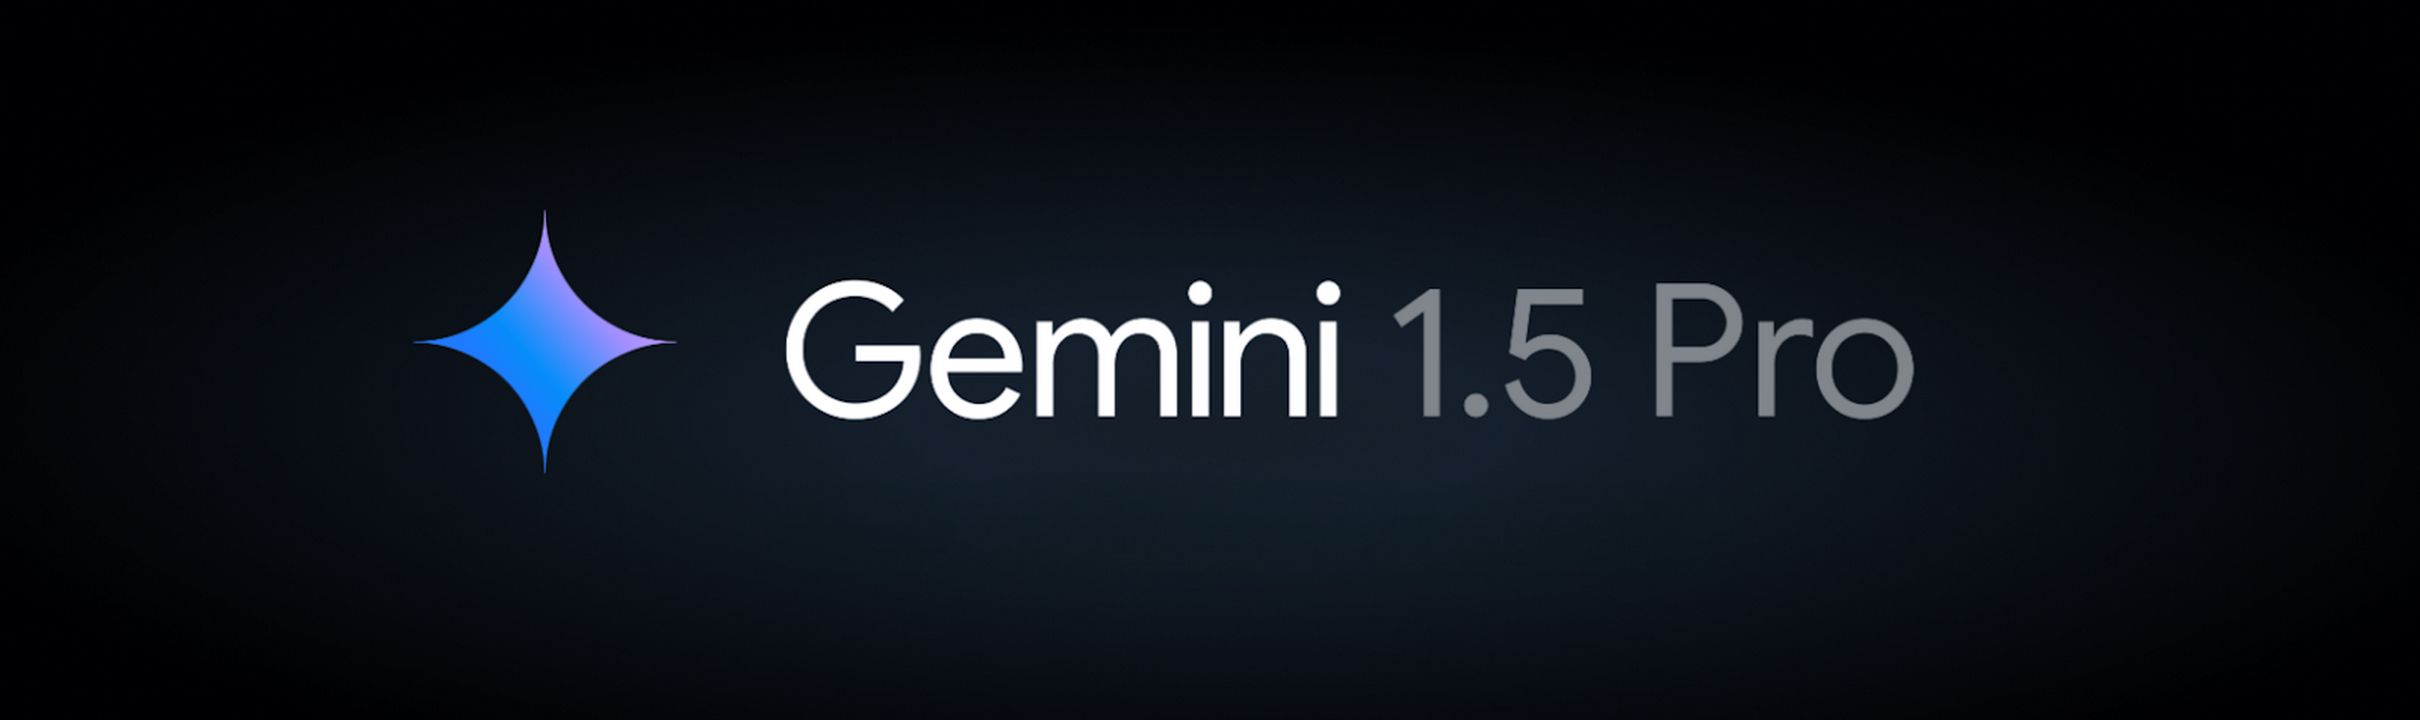 Unlock New Possibilities with Gemini 1.5 Pro: Audio, JSON, and More